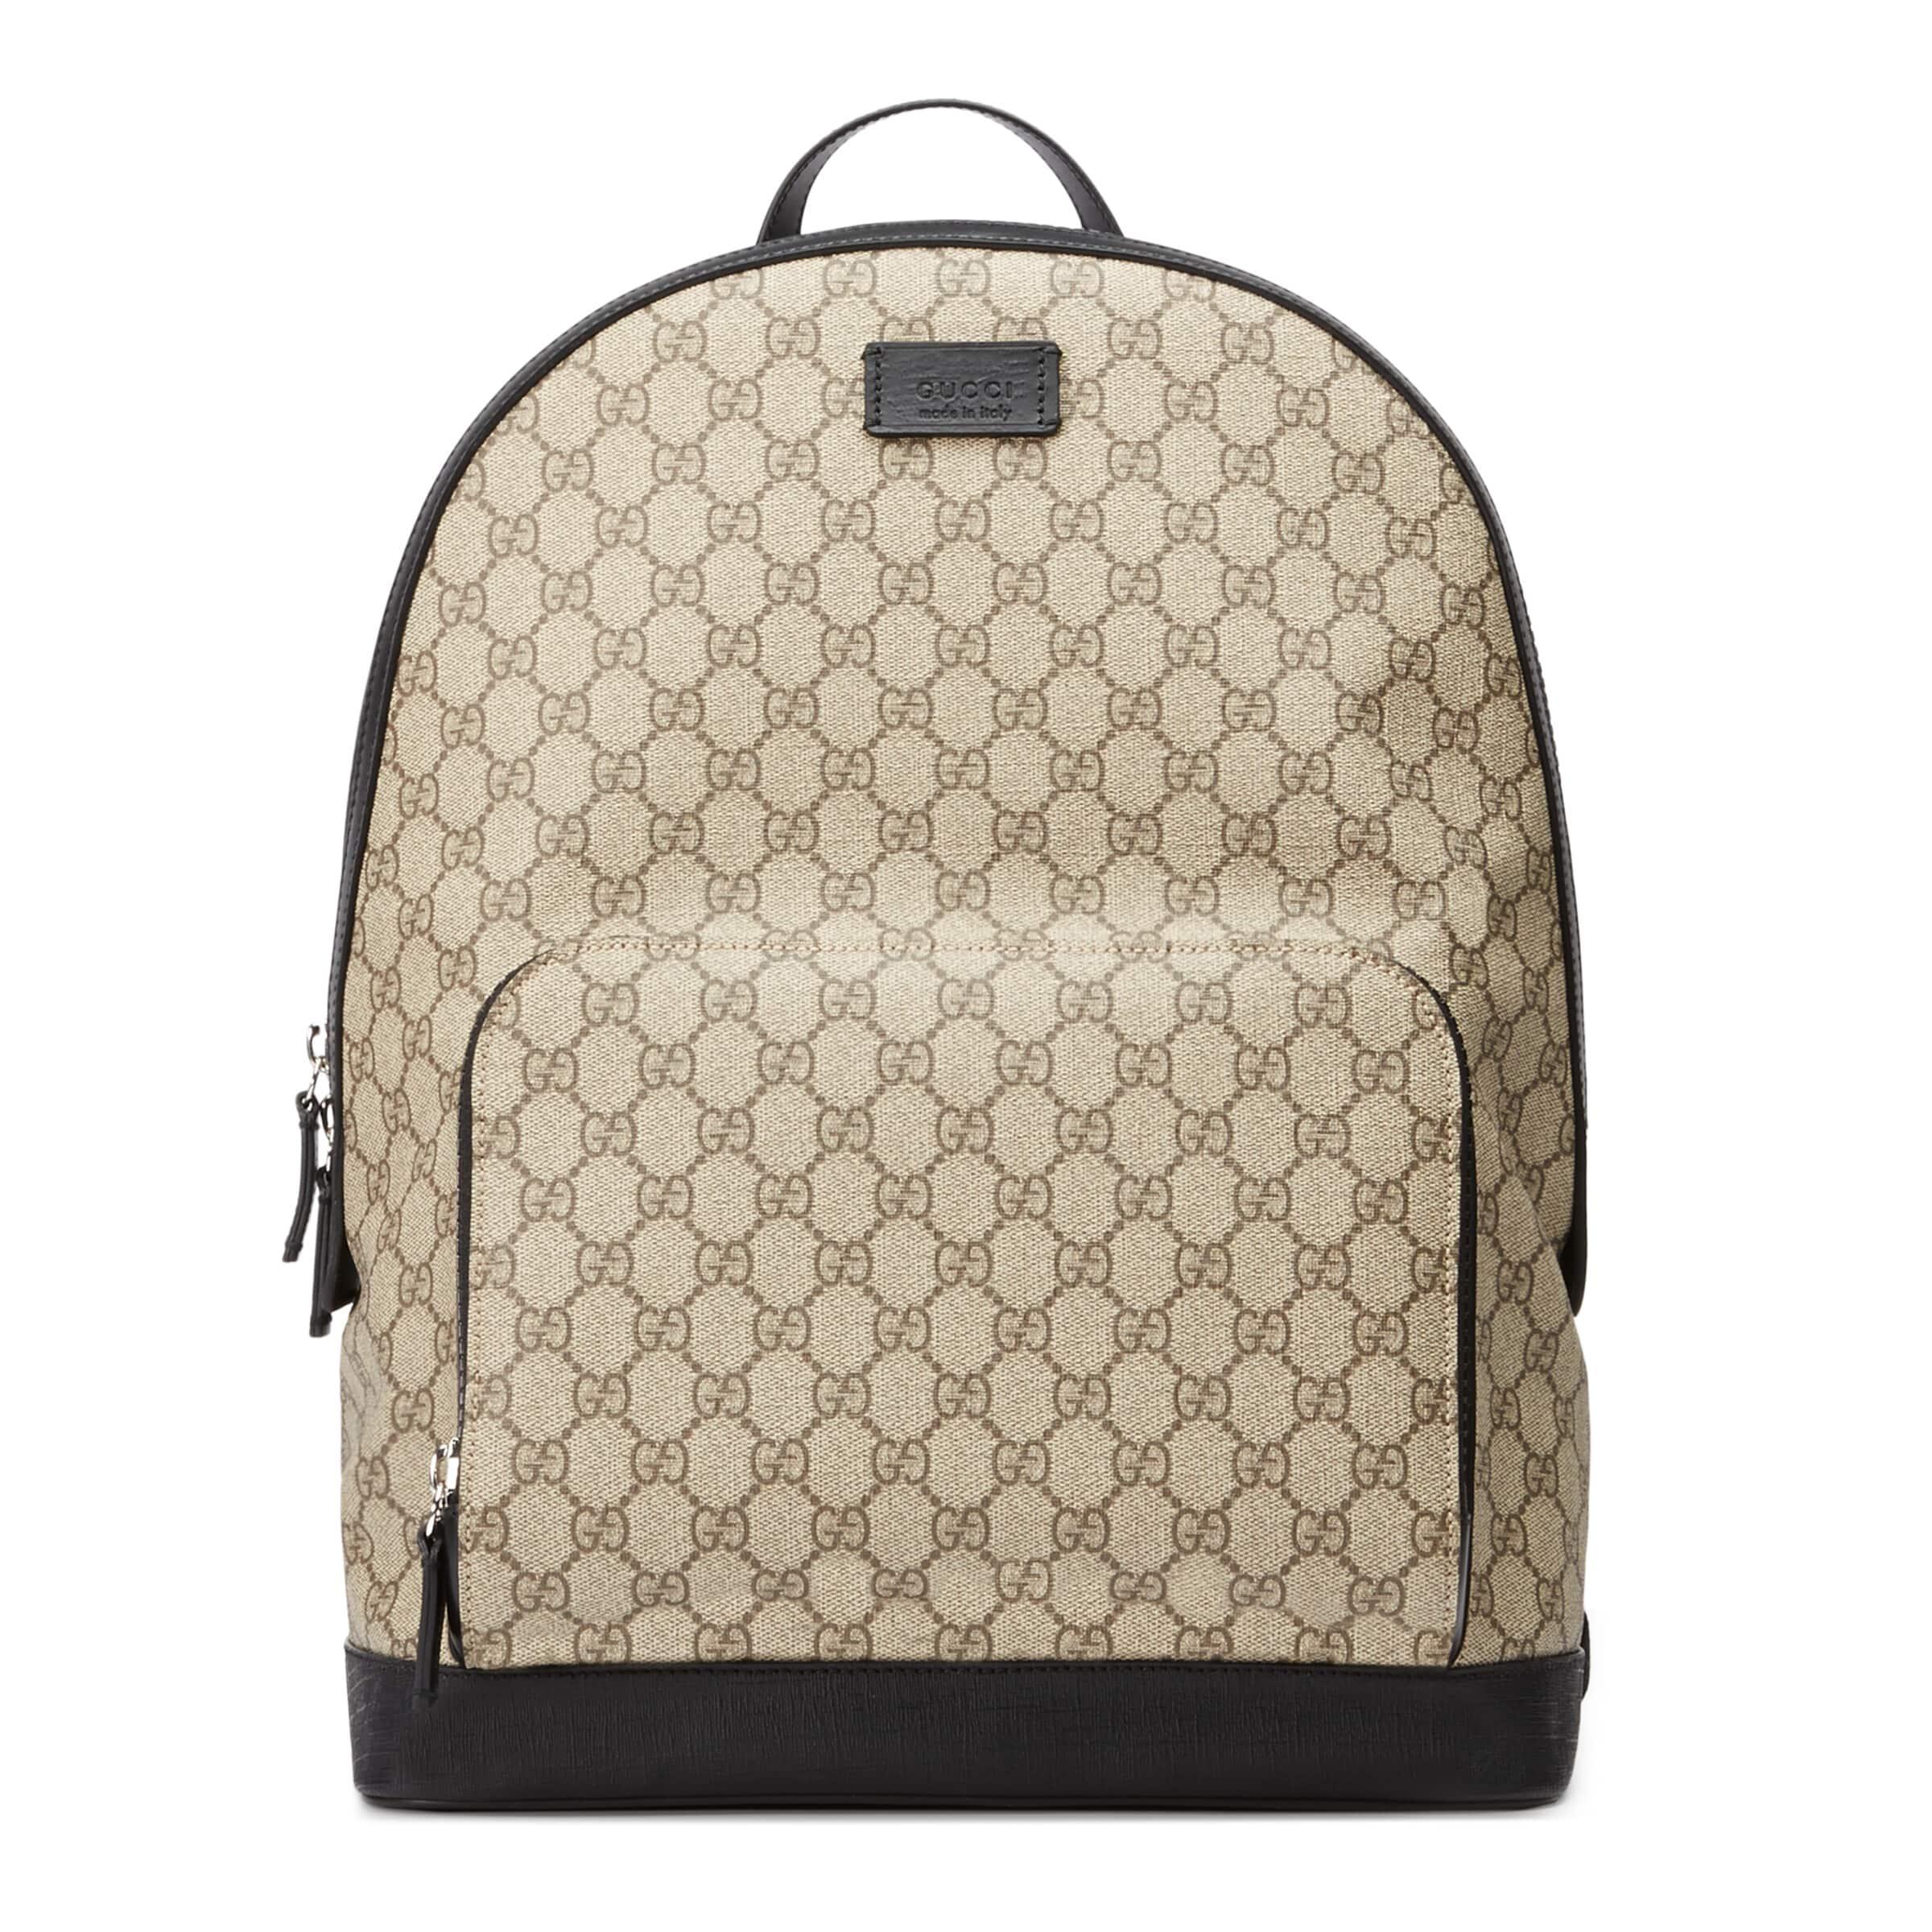 Gucci GG Supreme Backpack in Natural